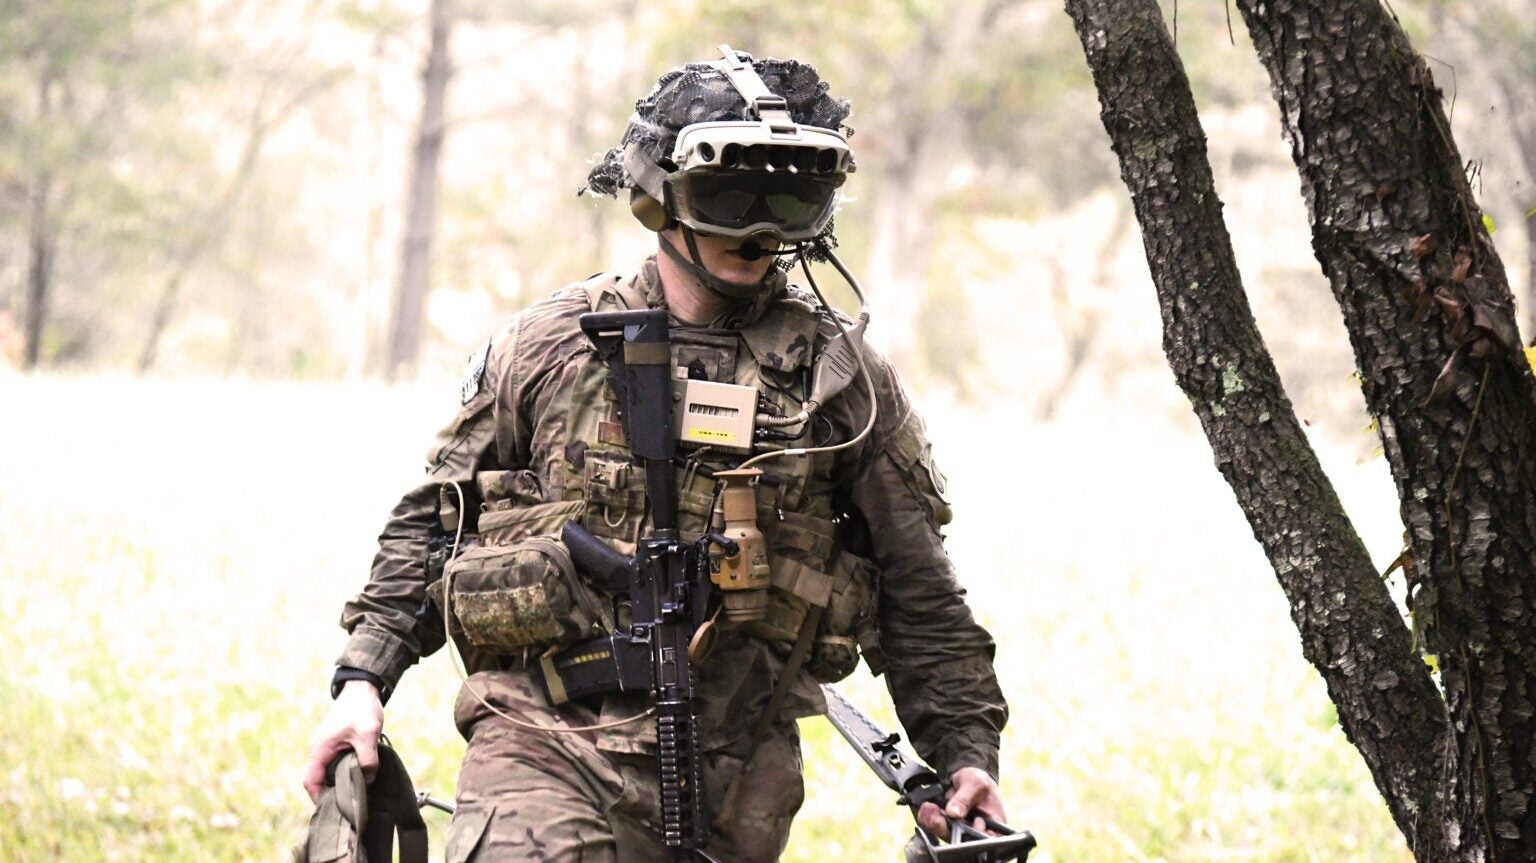 DARPA wants to revolutionize military training with augmented reality